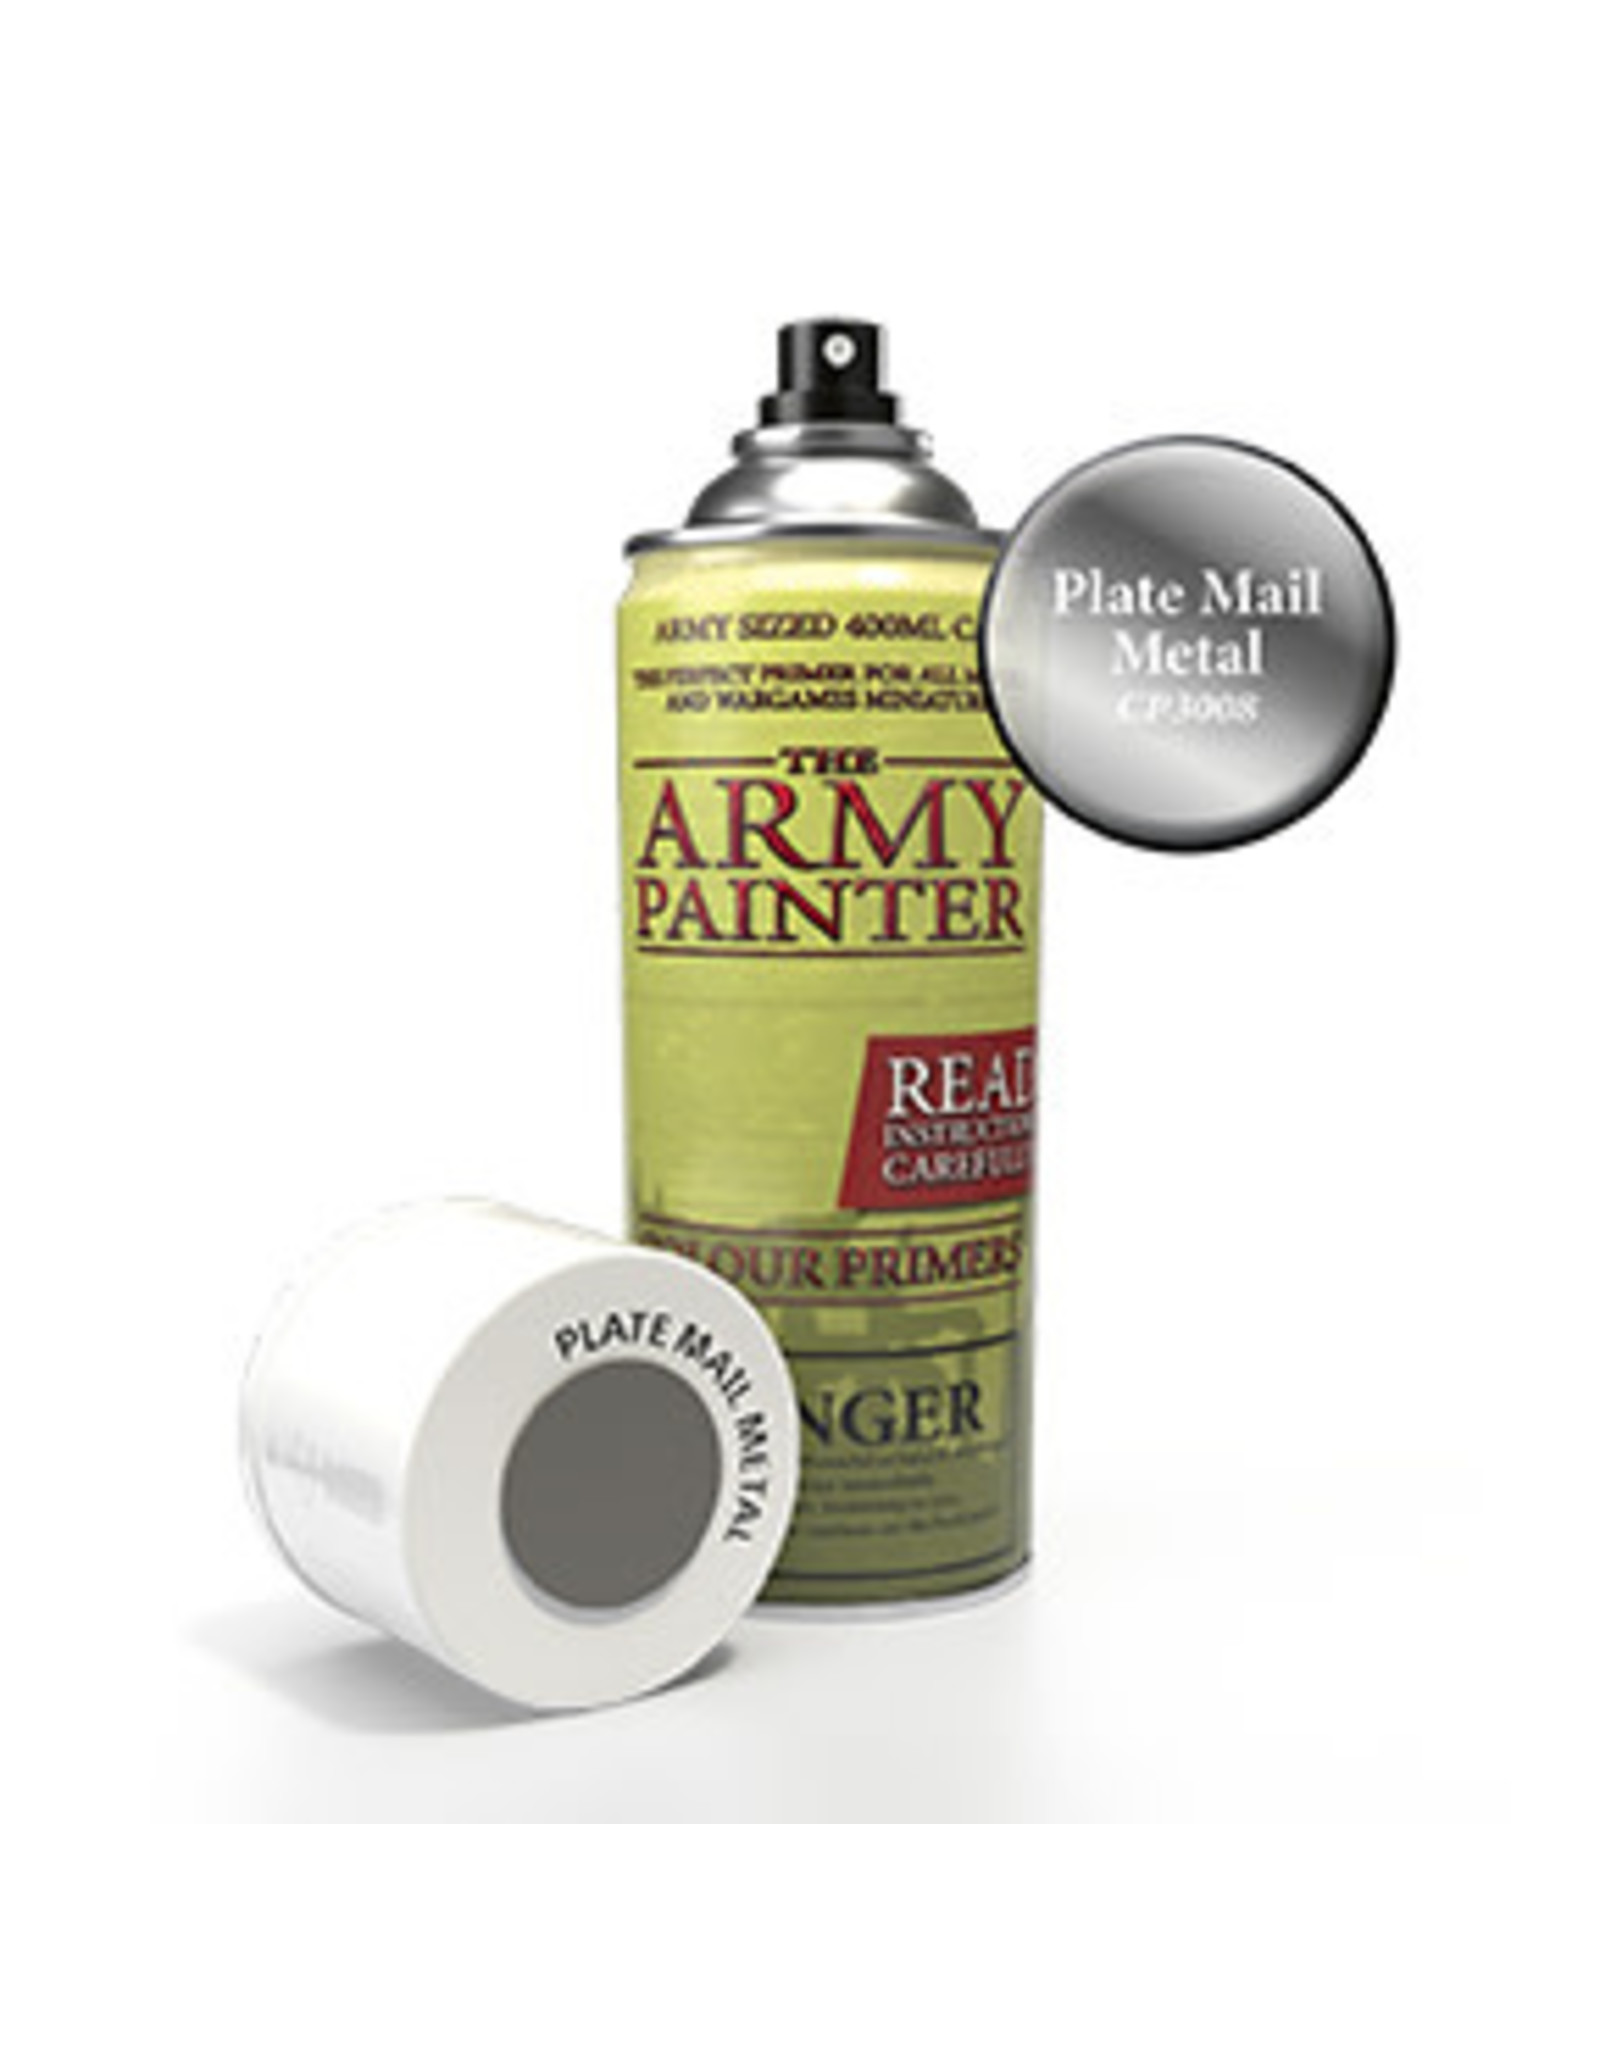 Army Painter Colour Primer Plate Mail Metal